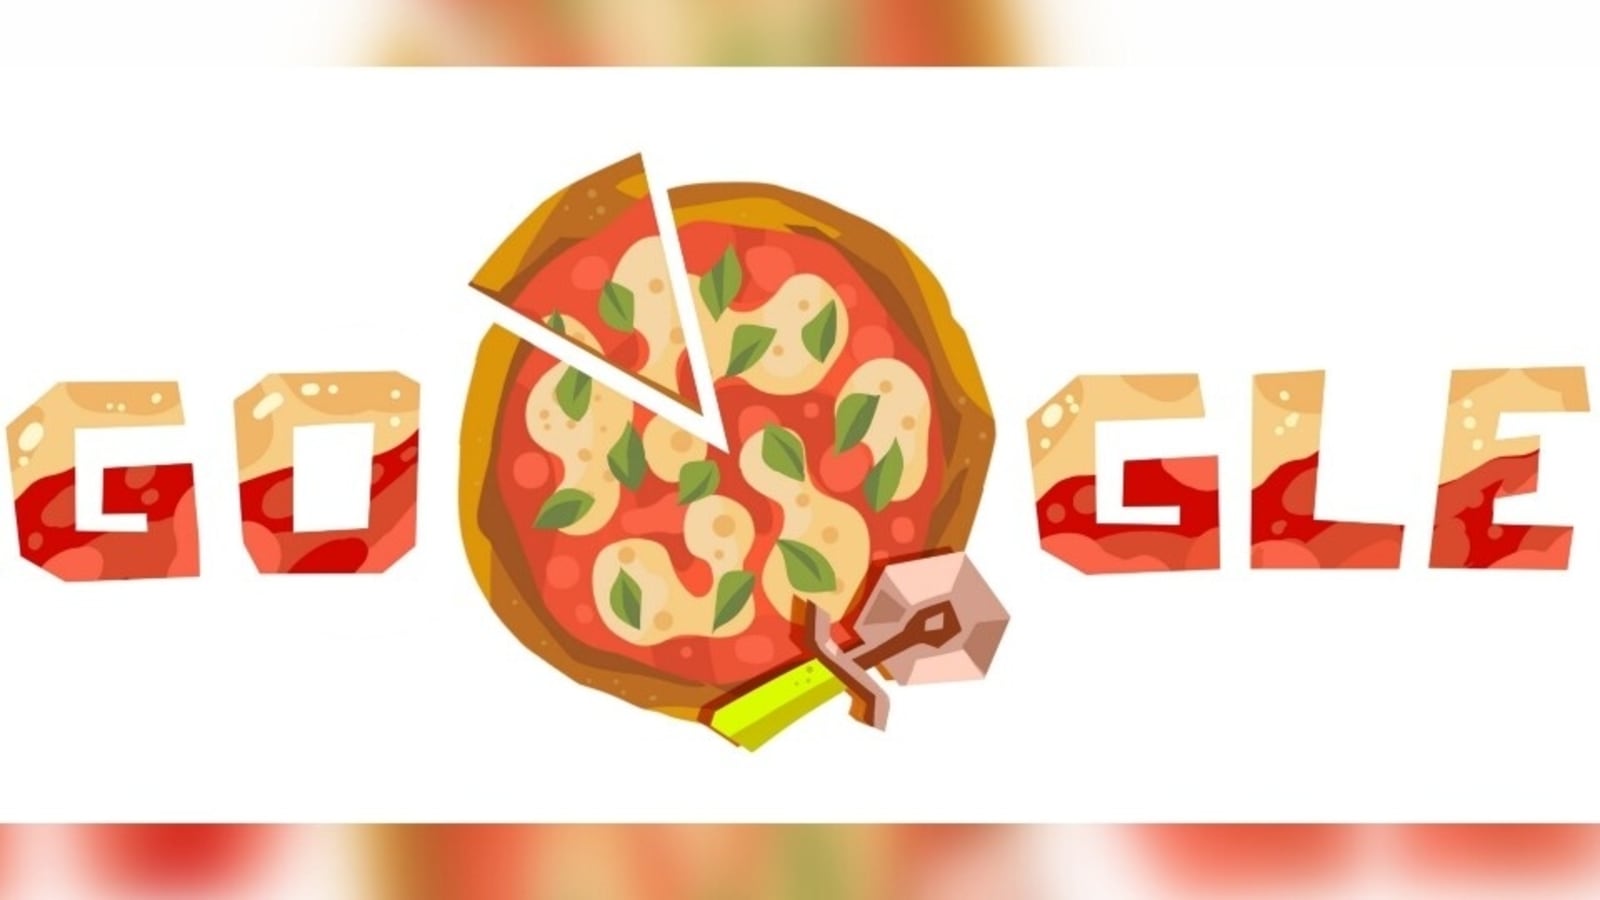 2023 Doodle for Google Contest Totals $100K+